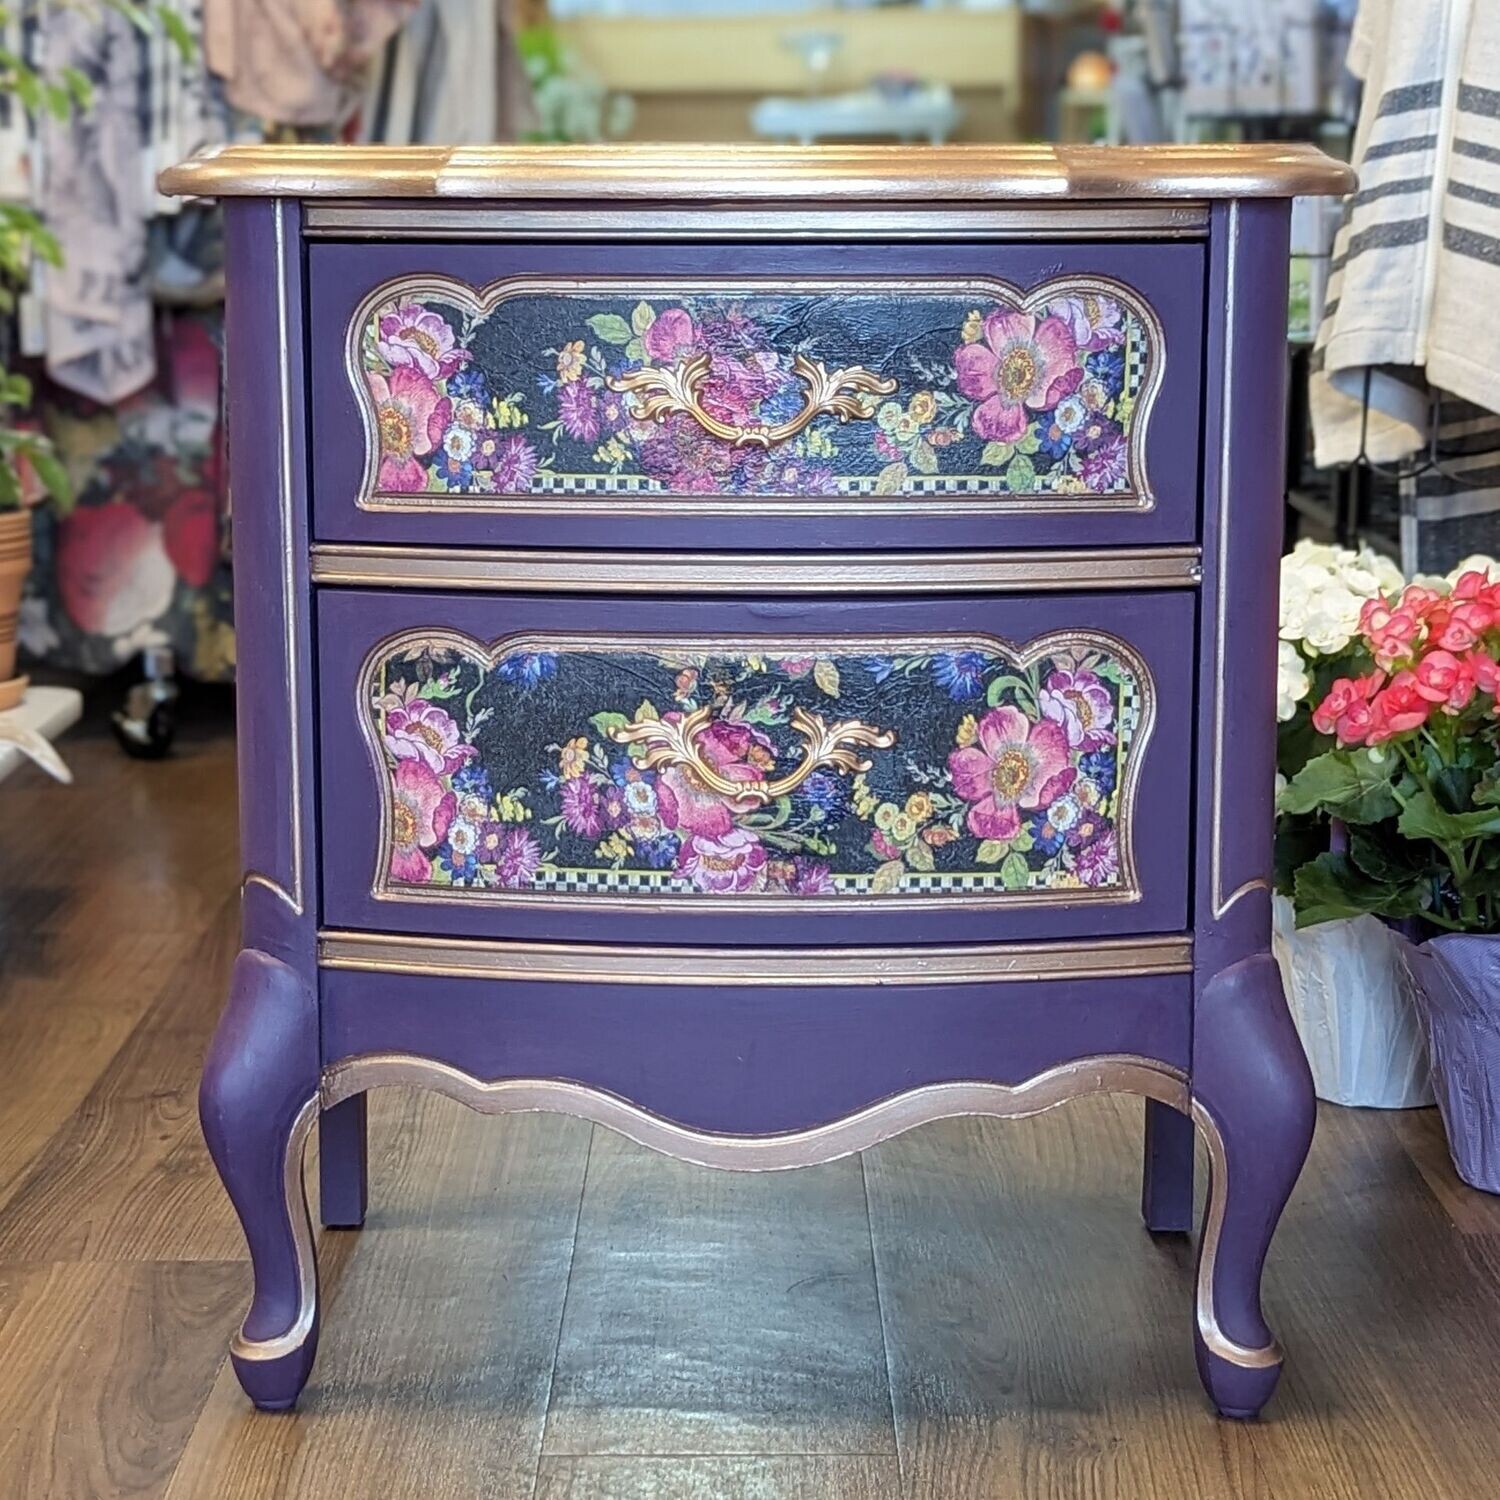 Upcycled Purple Floral and Checkered Dresser